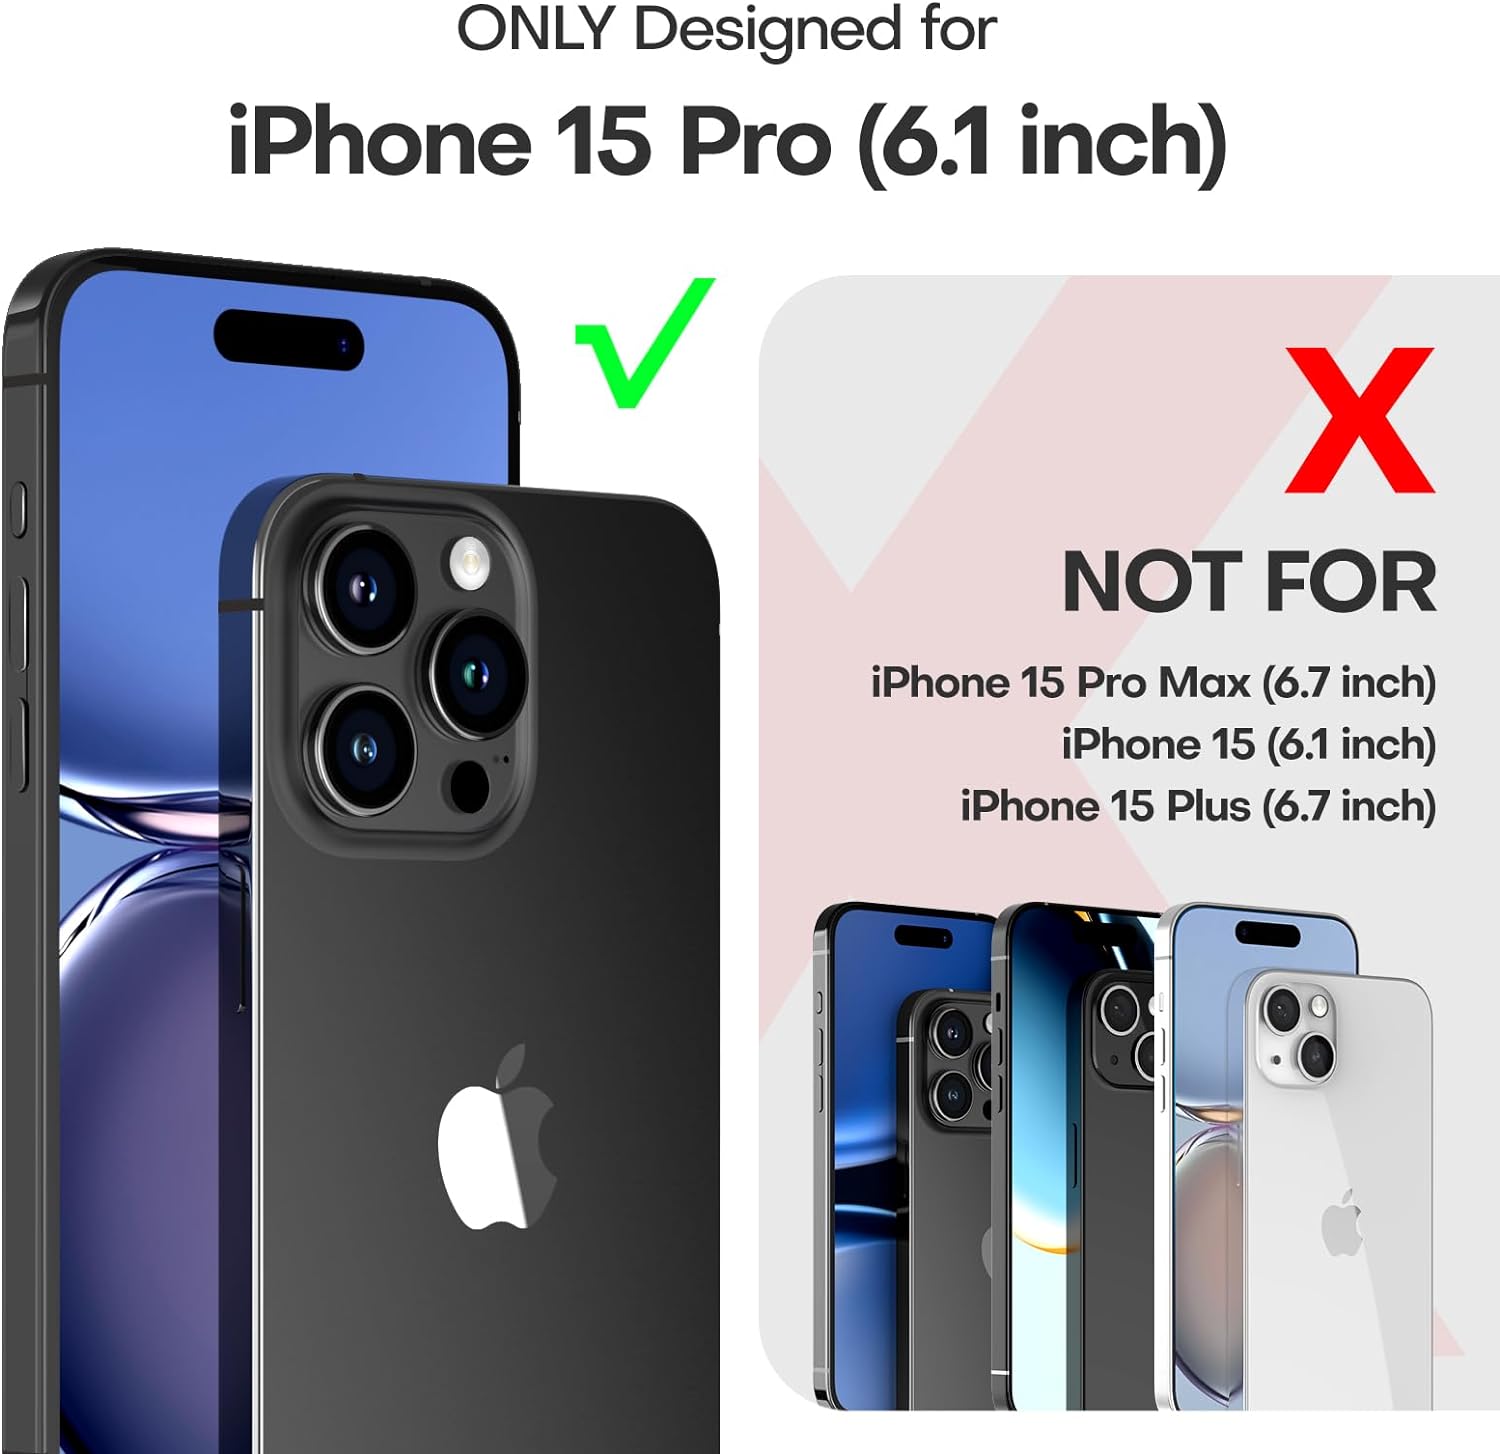 TAURI 5 in 1 for iPhone 15 Pro Case, [Not-Yellowing] with 2X Screen Protector + 2X Camera Lens Protector, [Military Grade Drop Protection] Shockproof Slim Phone Case for iPhone 15 Pro, Blue